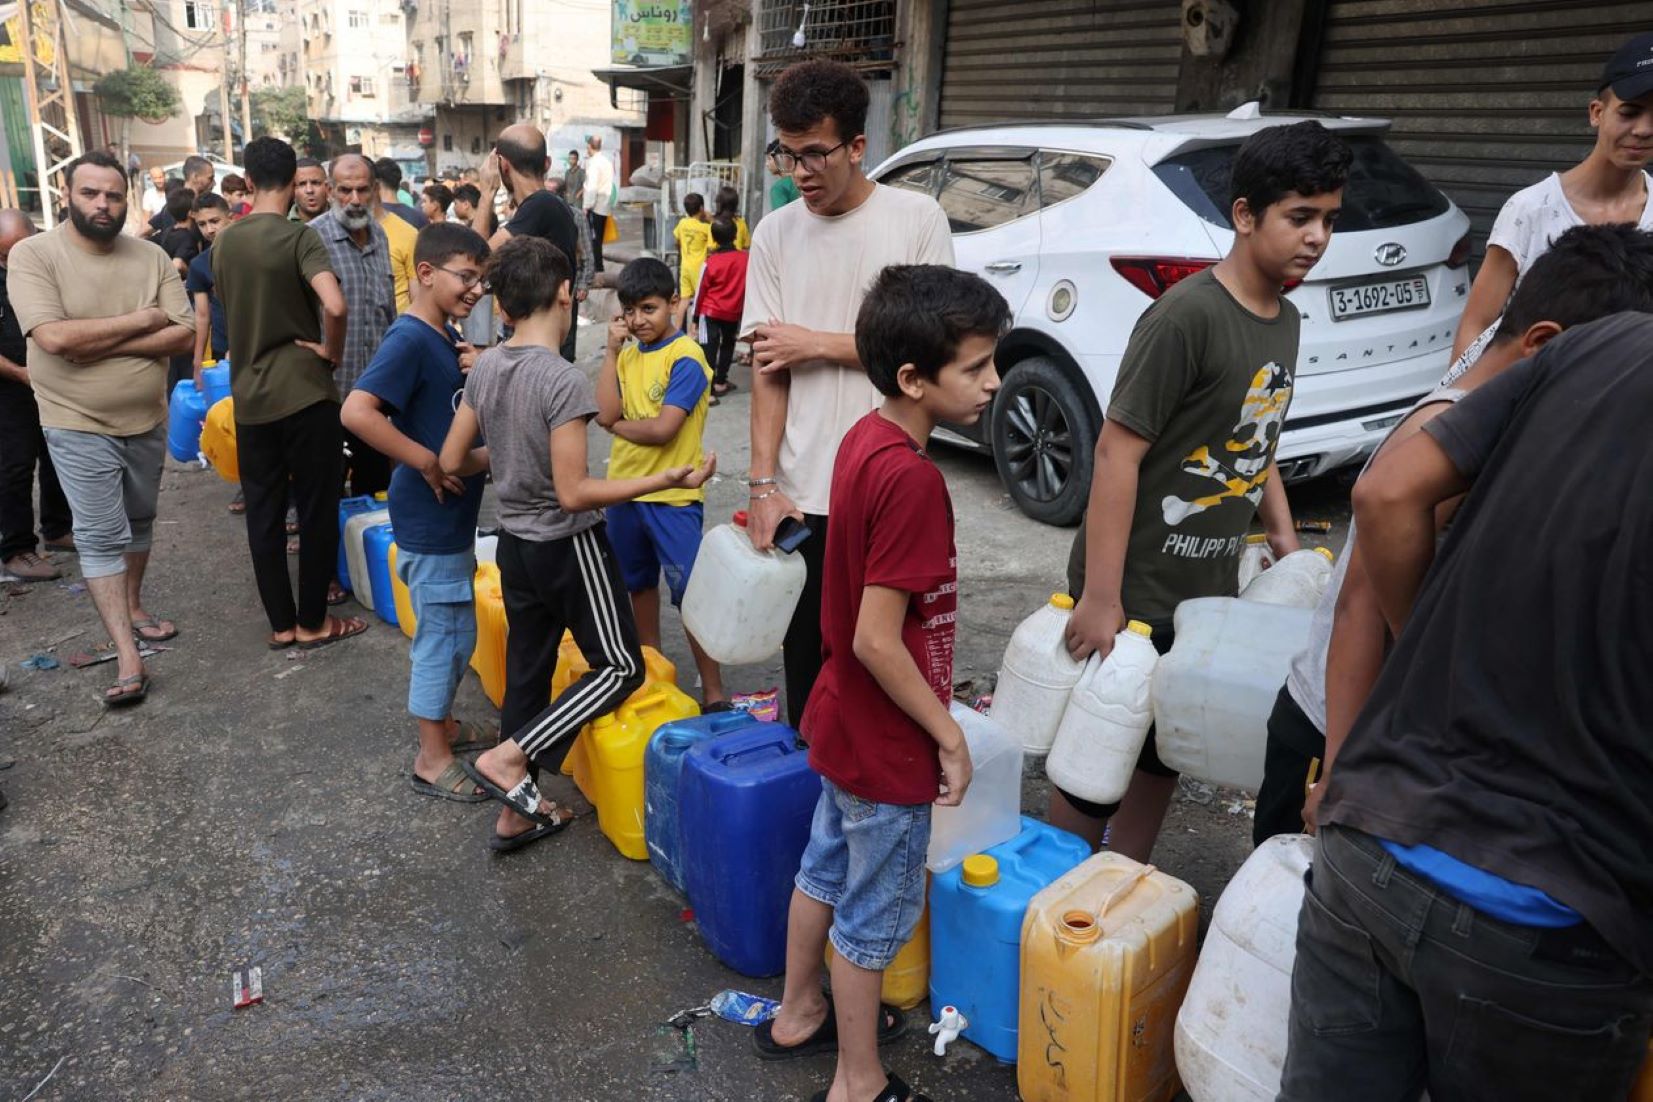 Gaza City Faces Worsening Crisis Due To Complete Water Well Shutdown: Media Office